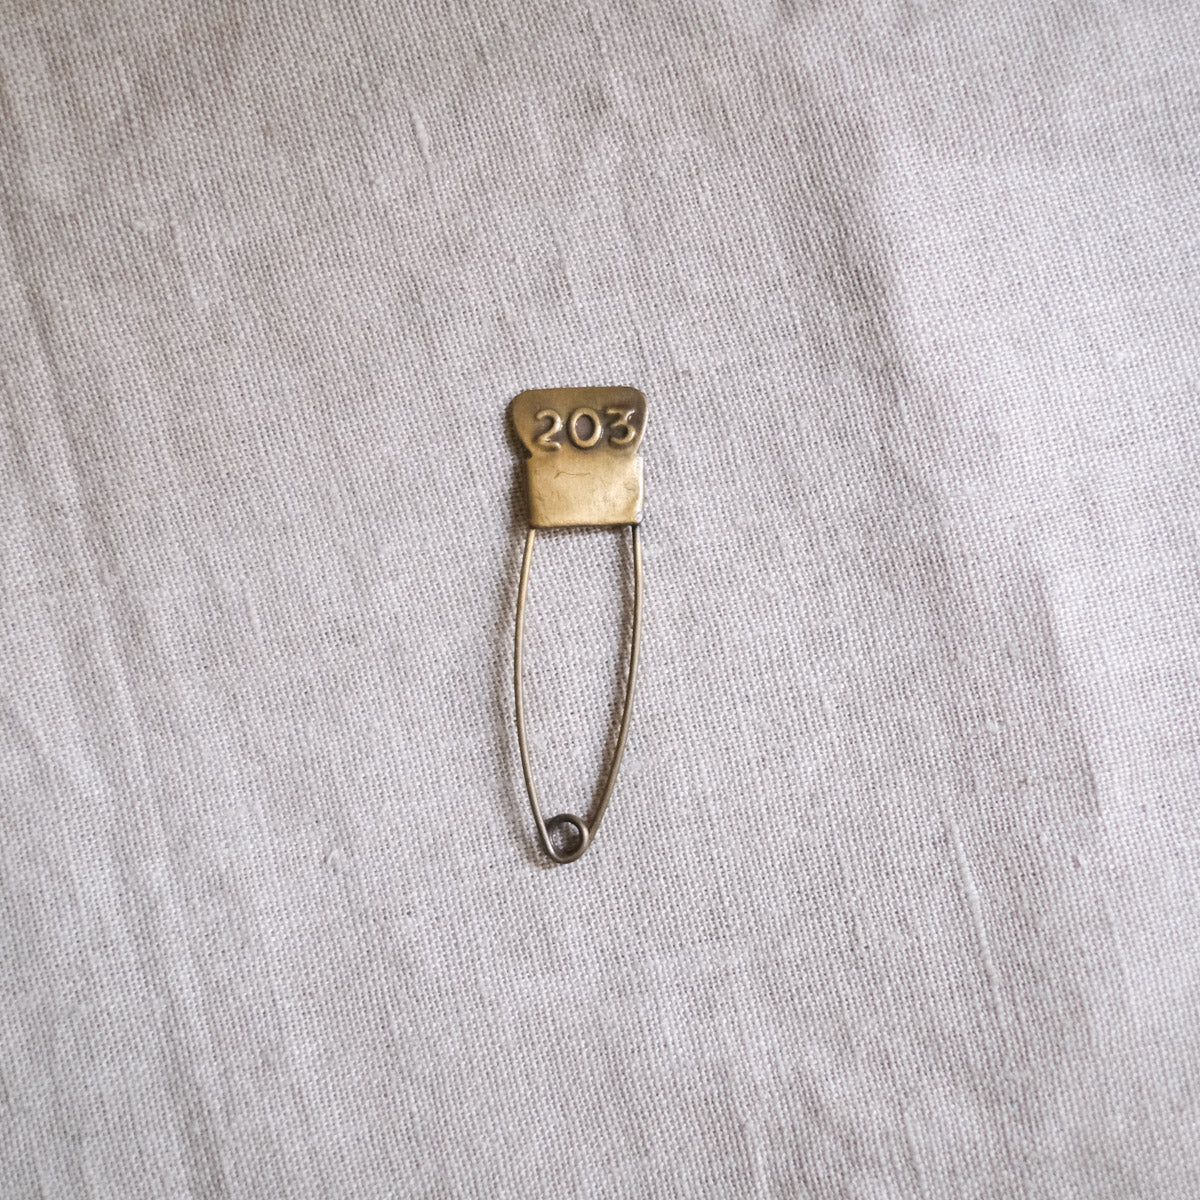 Brass Number Pin